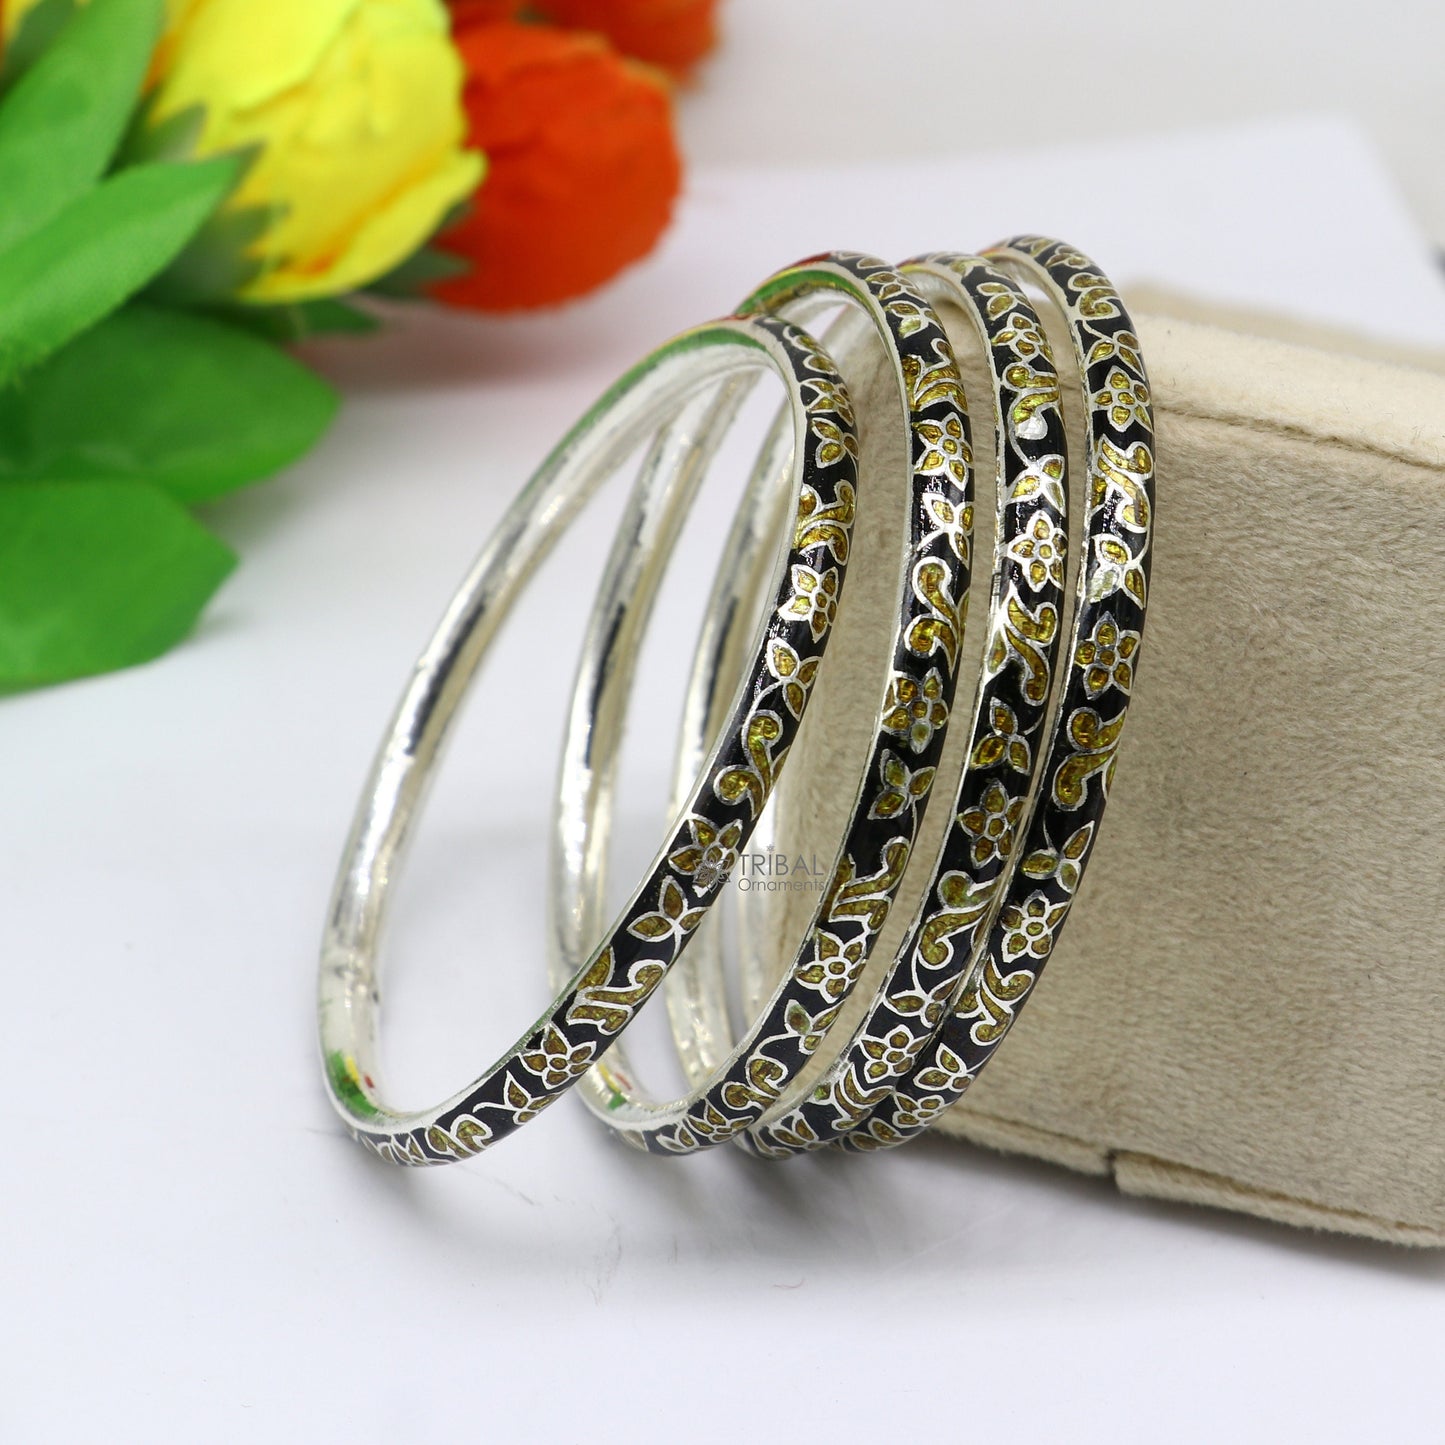 925 Sterling silver Traditional cultural design meenakari (color enamel )bangles bracelet brides trendy style jewelry from india nbA370 - TRIBAL ORNAMENTS